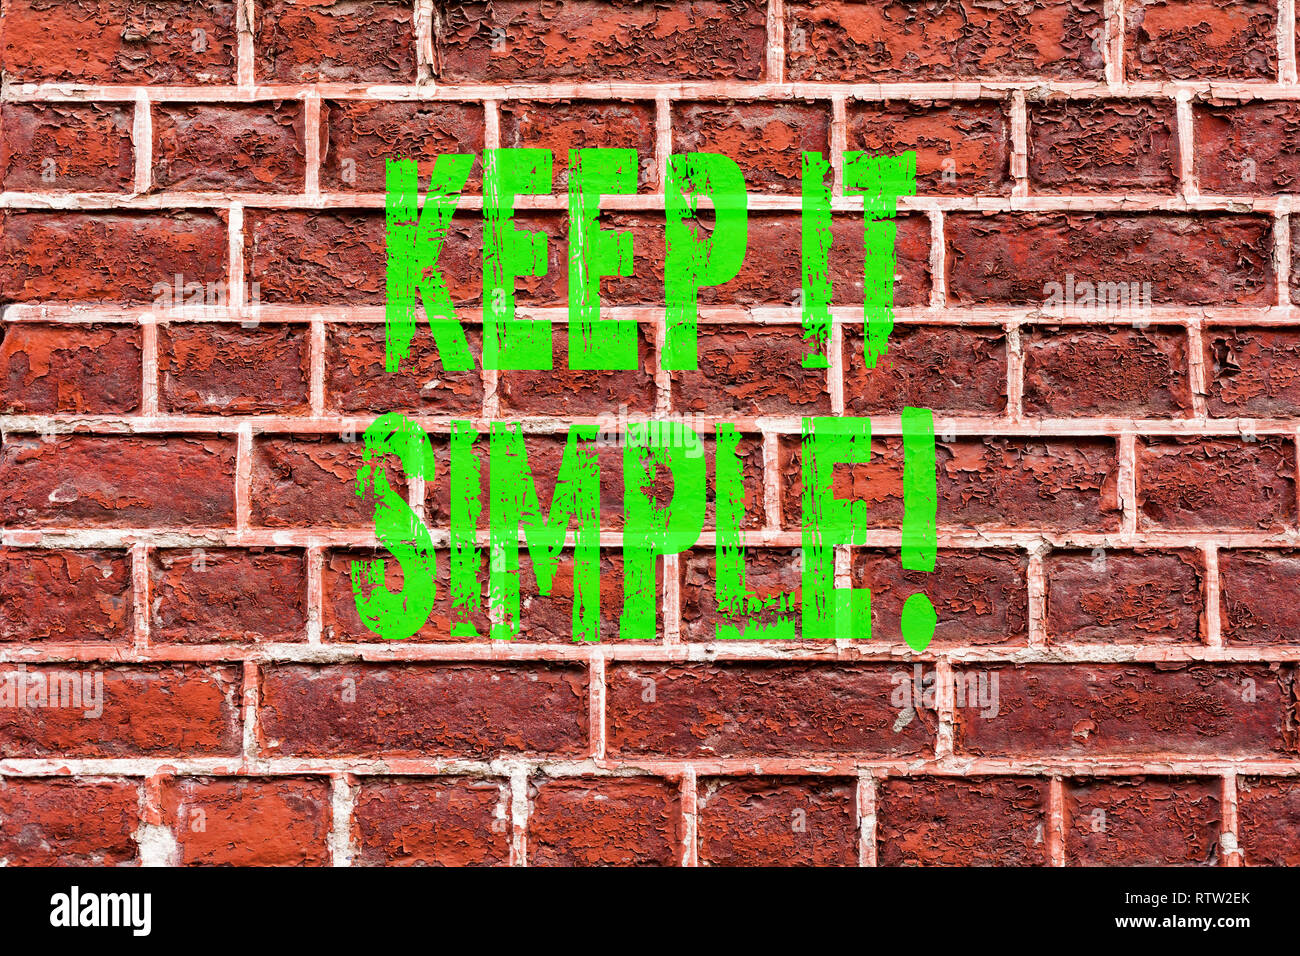 Word Writing Text Keep It Simple Business Concept For Simplify Things Easy Clear Concise Ideas Brick Wall Art Like Graffiti Motivational Call Written Stock Photo Alamy